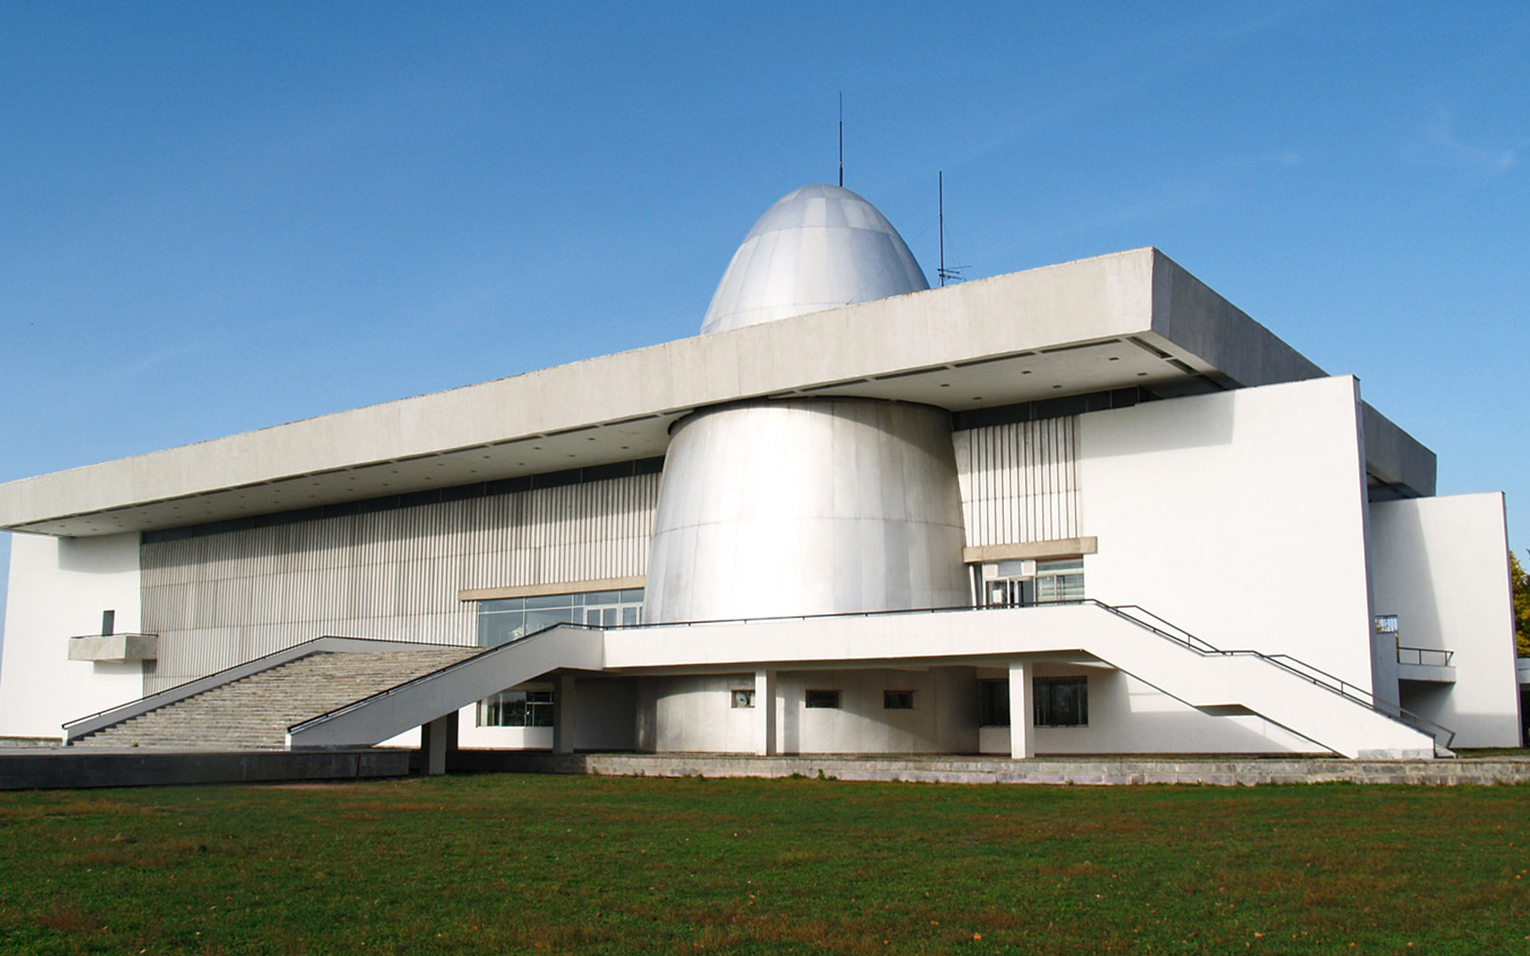 STATE MUSEUM OF THE HISTORY OF COSMONAUTICS NAMED AFTER K.E. TSIOLKOVSKY